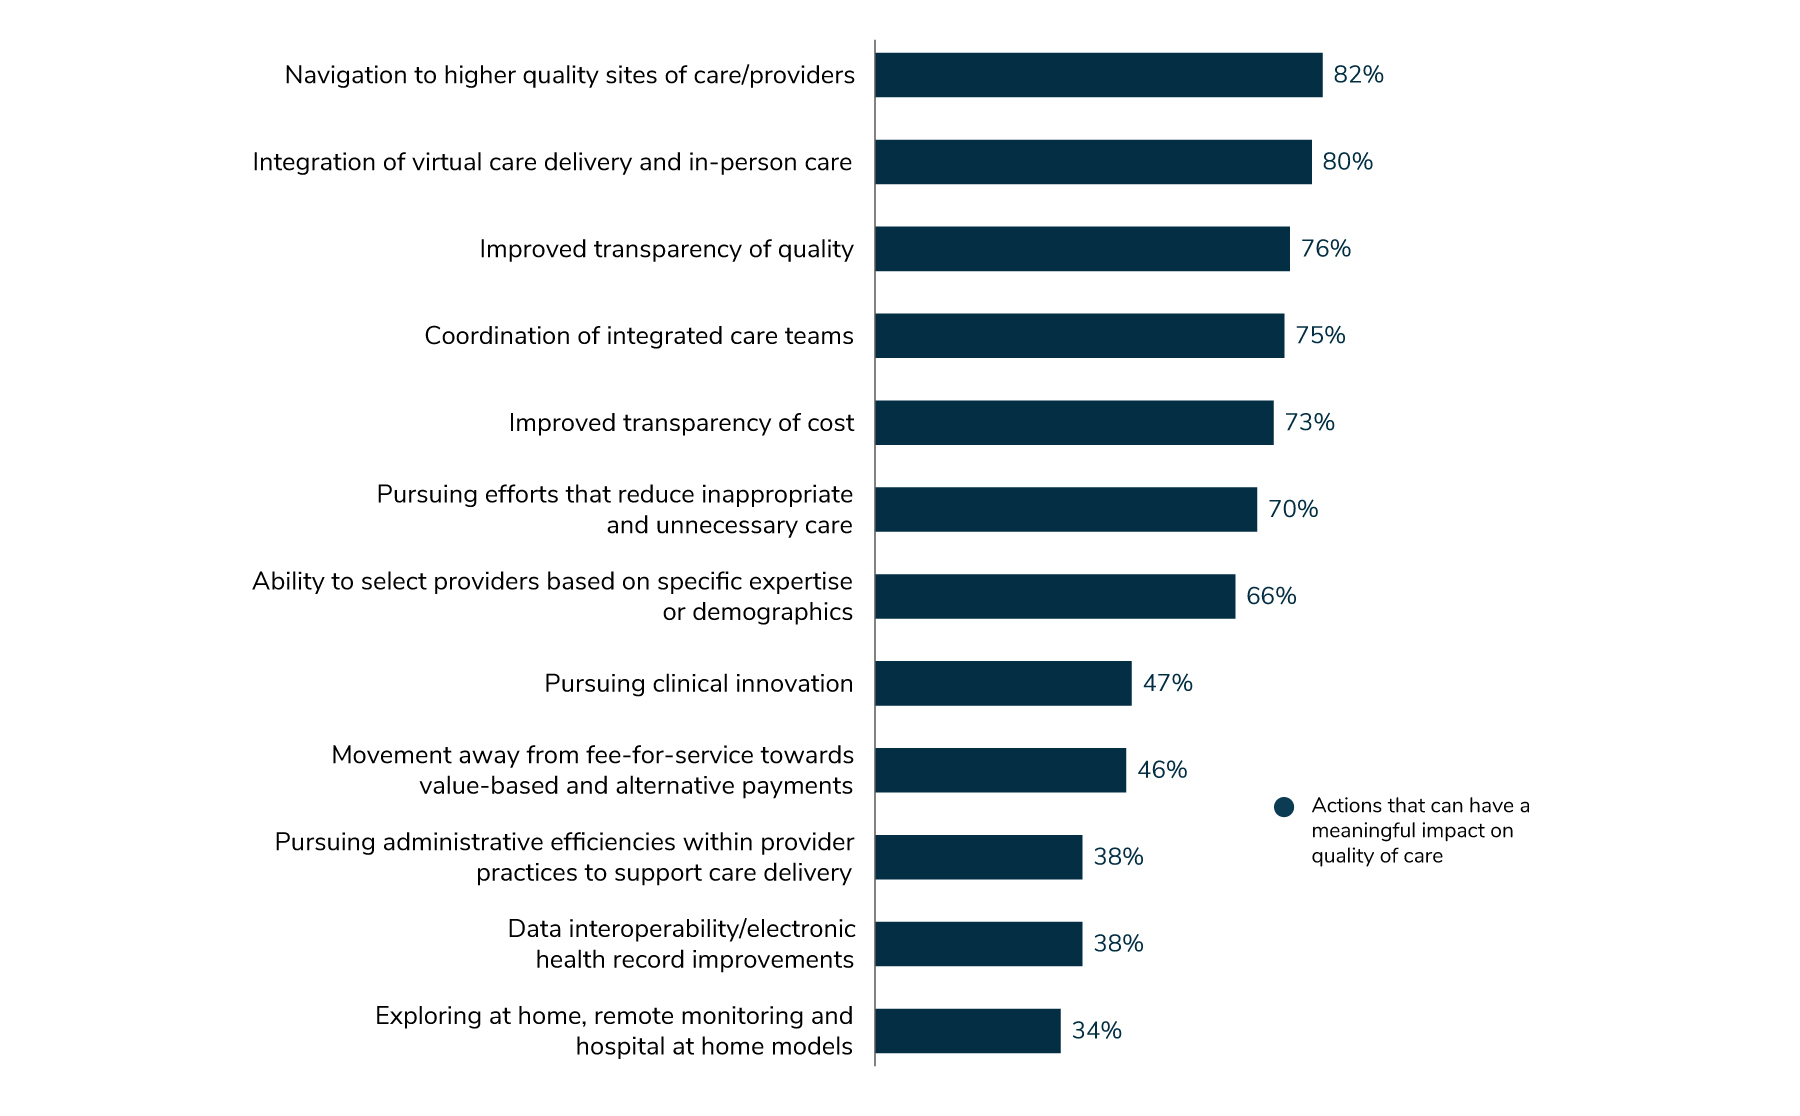 Employers report that the following can have a meaningful impact on the quality of care: integration of virtual and in-person care (84%), improved transparency (81%) and navigation to higher quality site of care (74%).